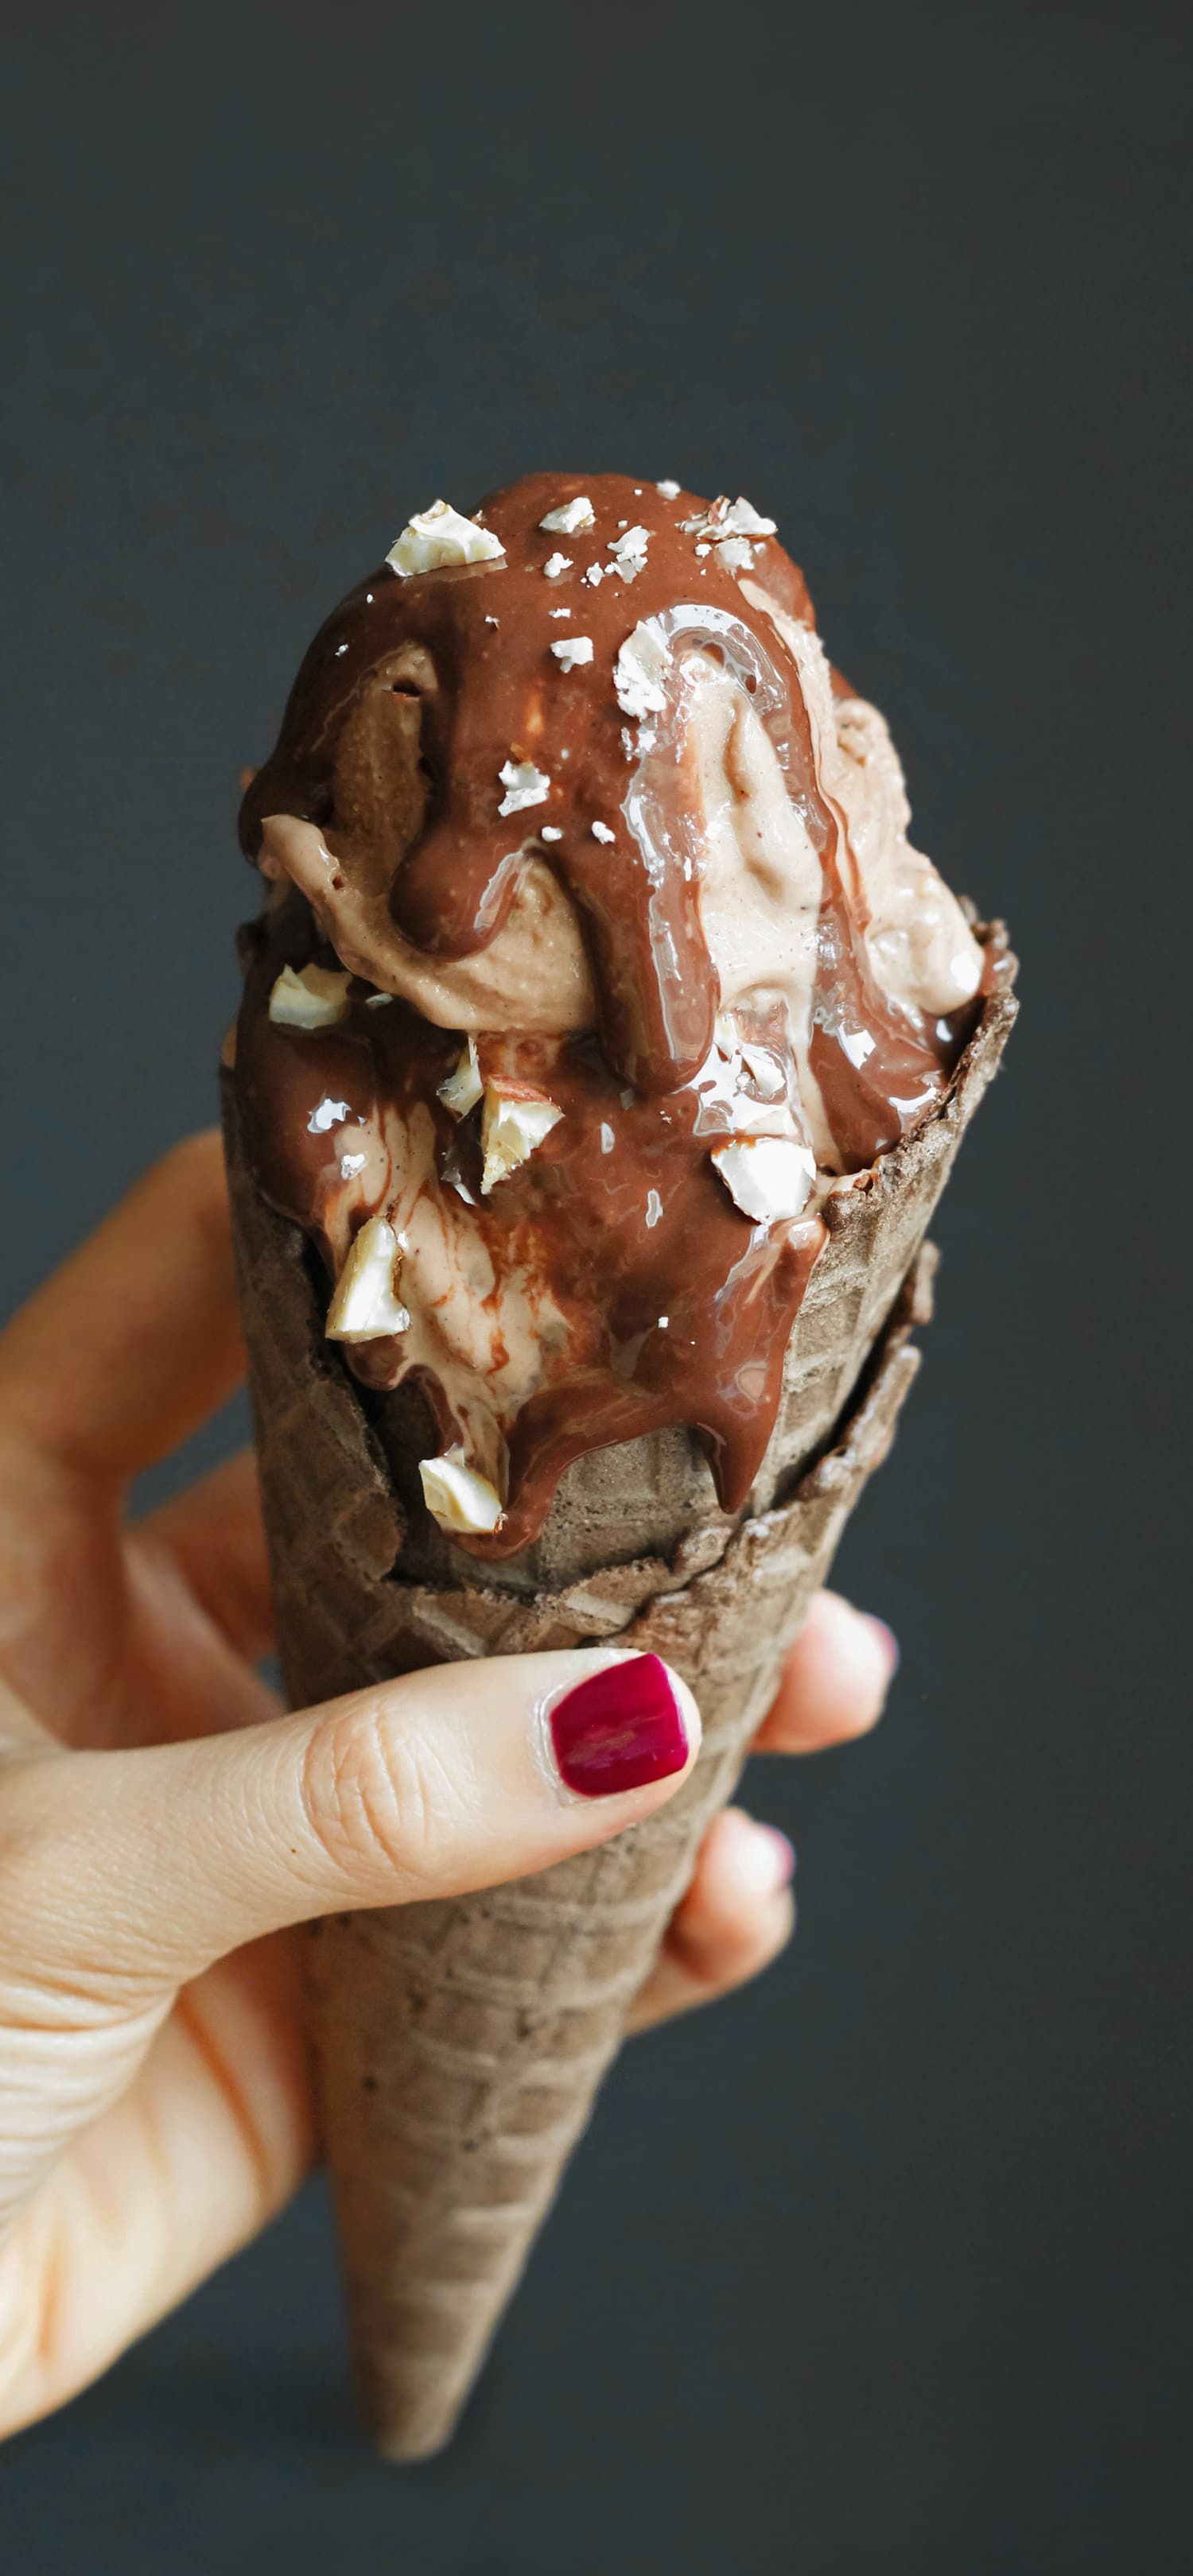 This Healthy Ferrero Rocher Ice Cream is so creamy, sweet, chocolatey, and hazelnutty, you’ll fall in love! It’s studded with chopped hazelnuts for that classic Ferrero Rocher flavor without the added sugar and artificial ingredients. This ice cream sure doesn't taste sugar free, low carb, high protein, and gluten free! -- Healthy Dessert Recipes with low calorie, low fat, gluten free, dairy free, and vegan options at the Desserts With Benefits Blog (www.DessertsWithBenefits.com)